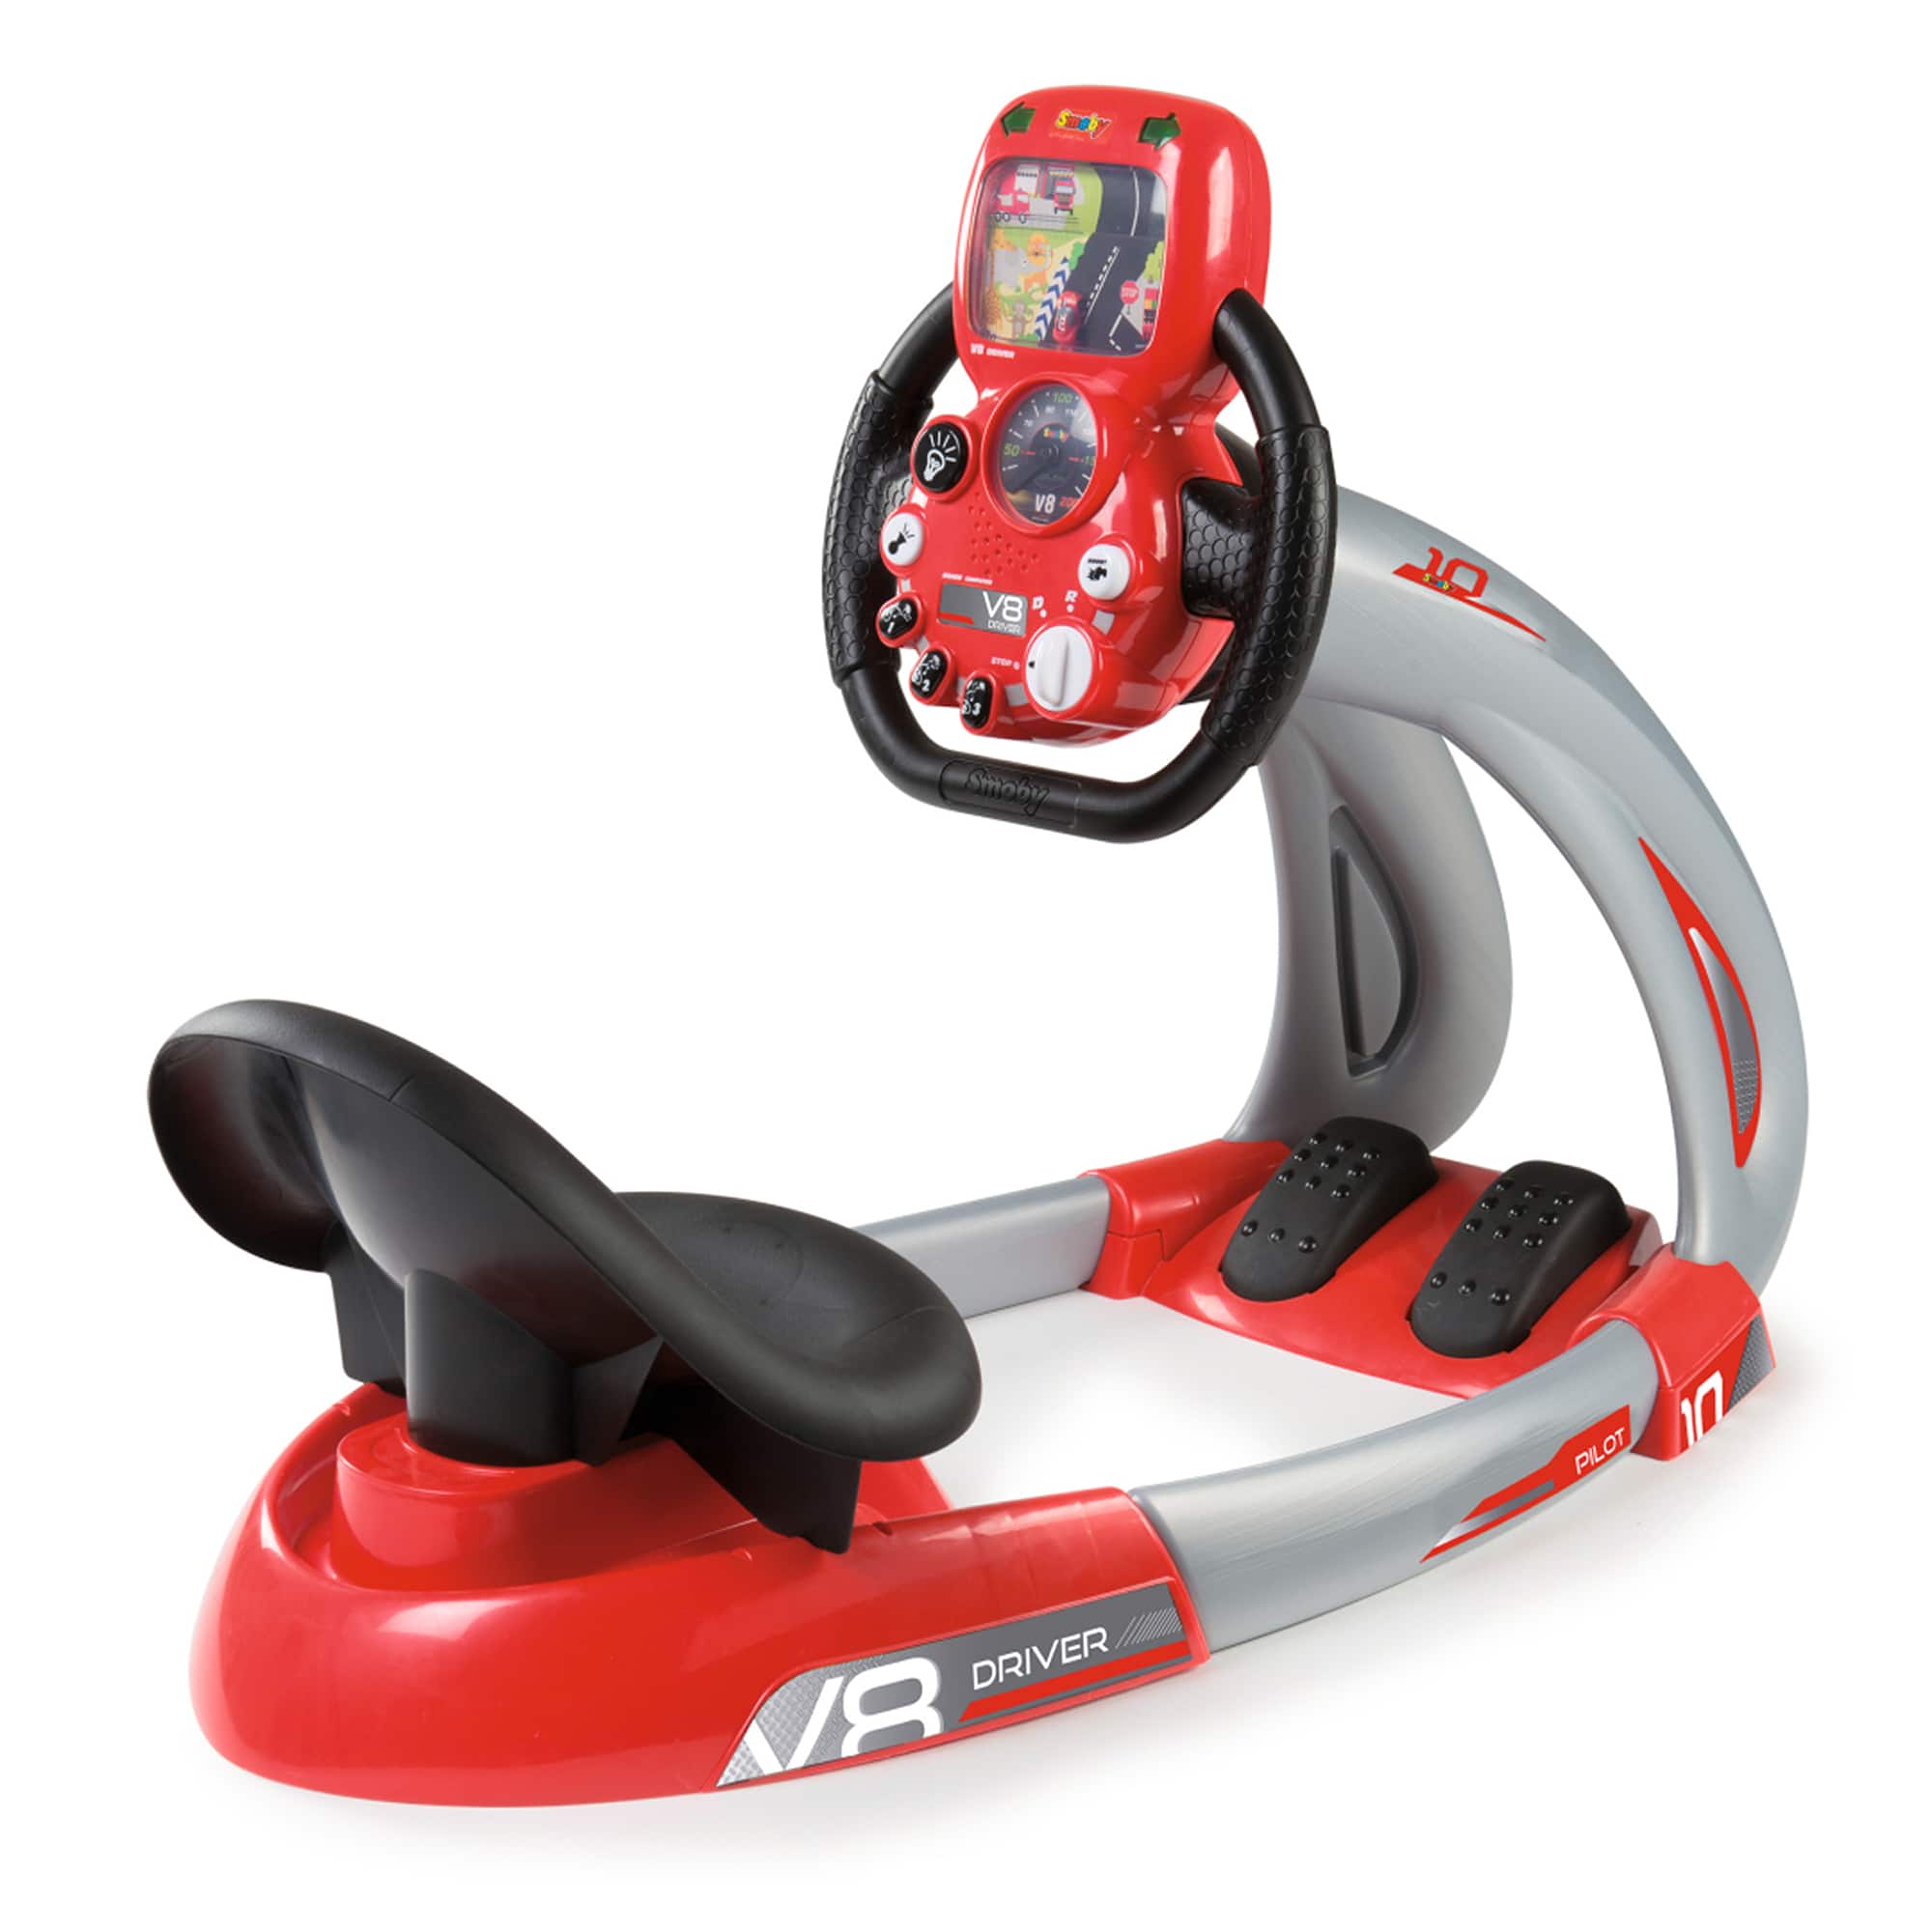 Indiener Exclusief bruiloft Smoby V8 Driver Toy | Michaels